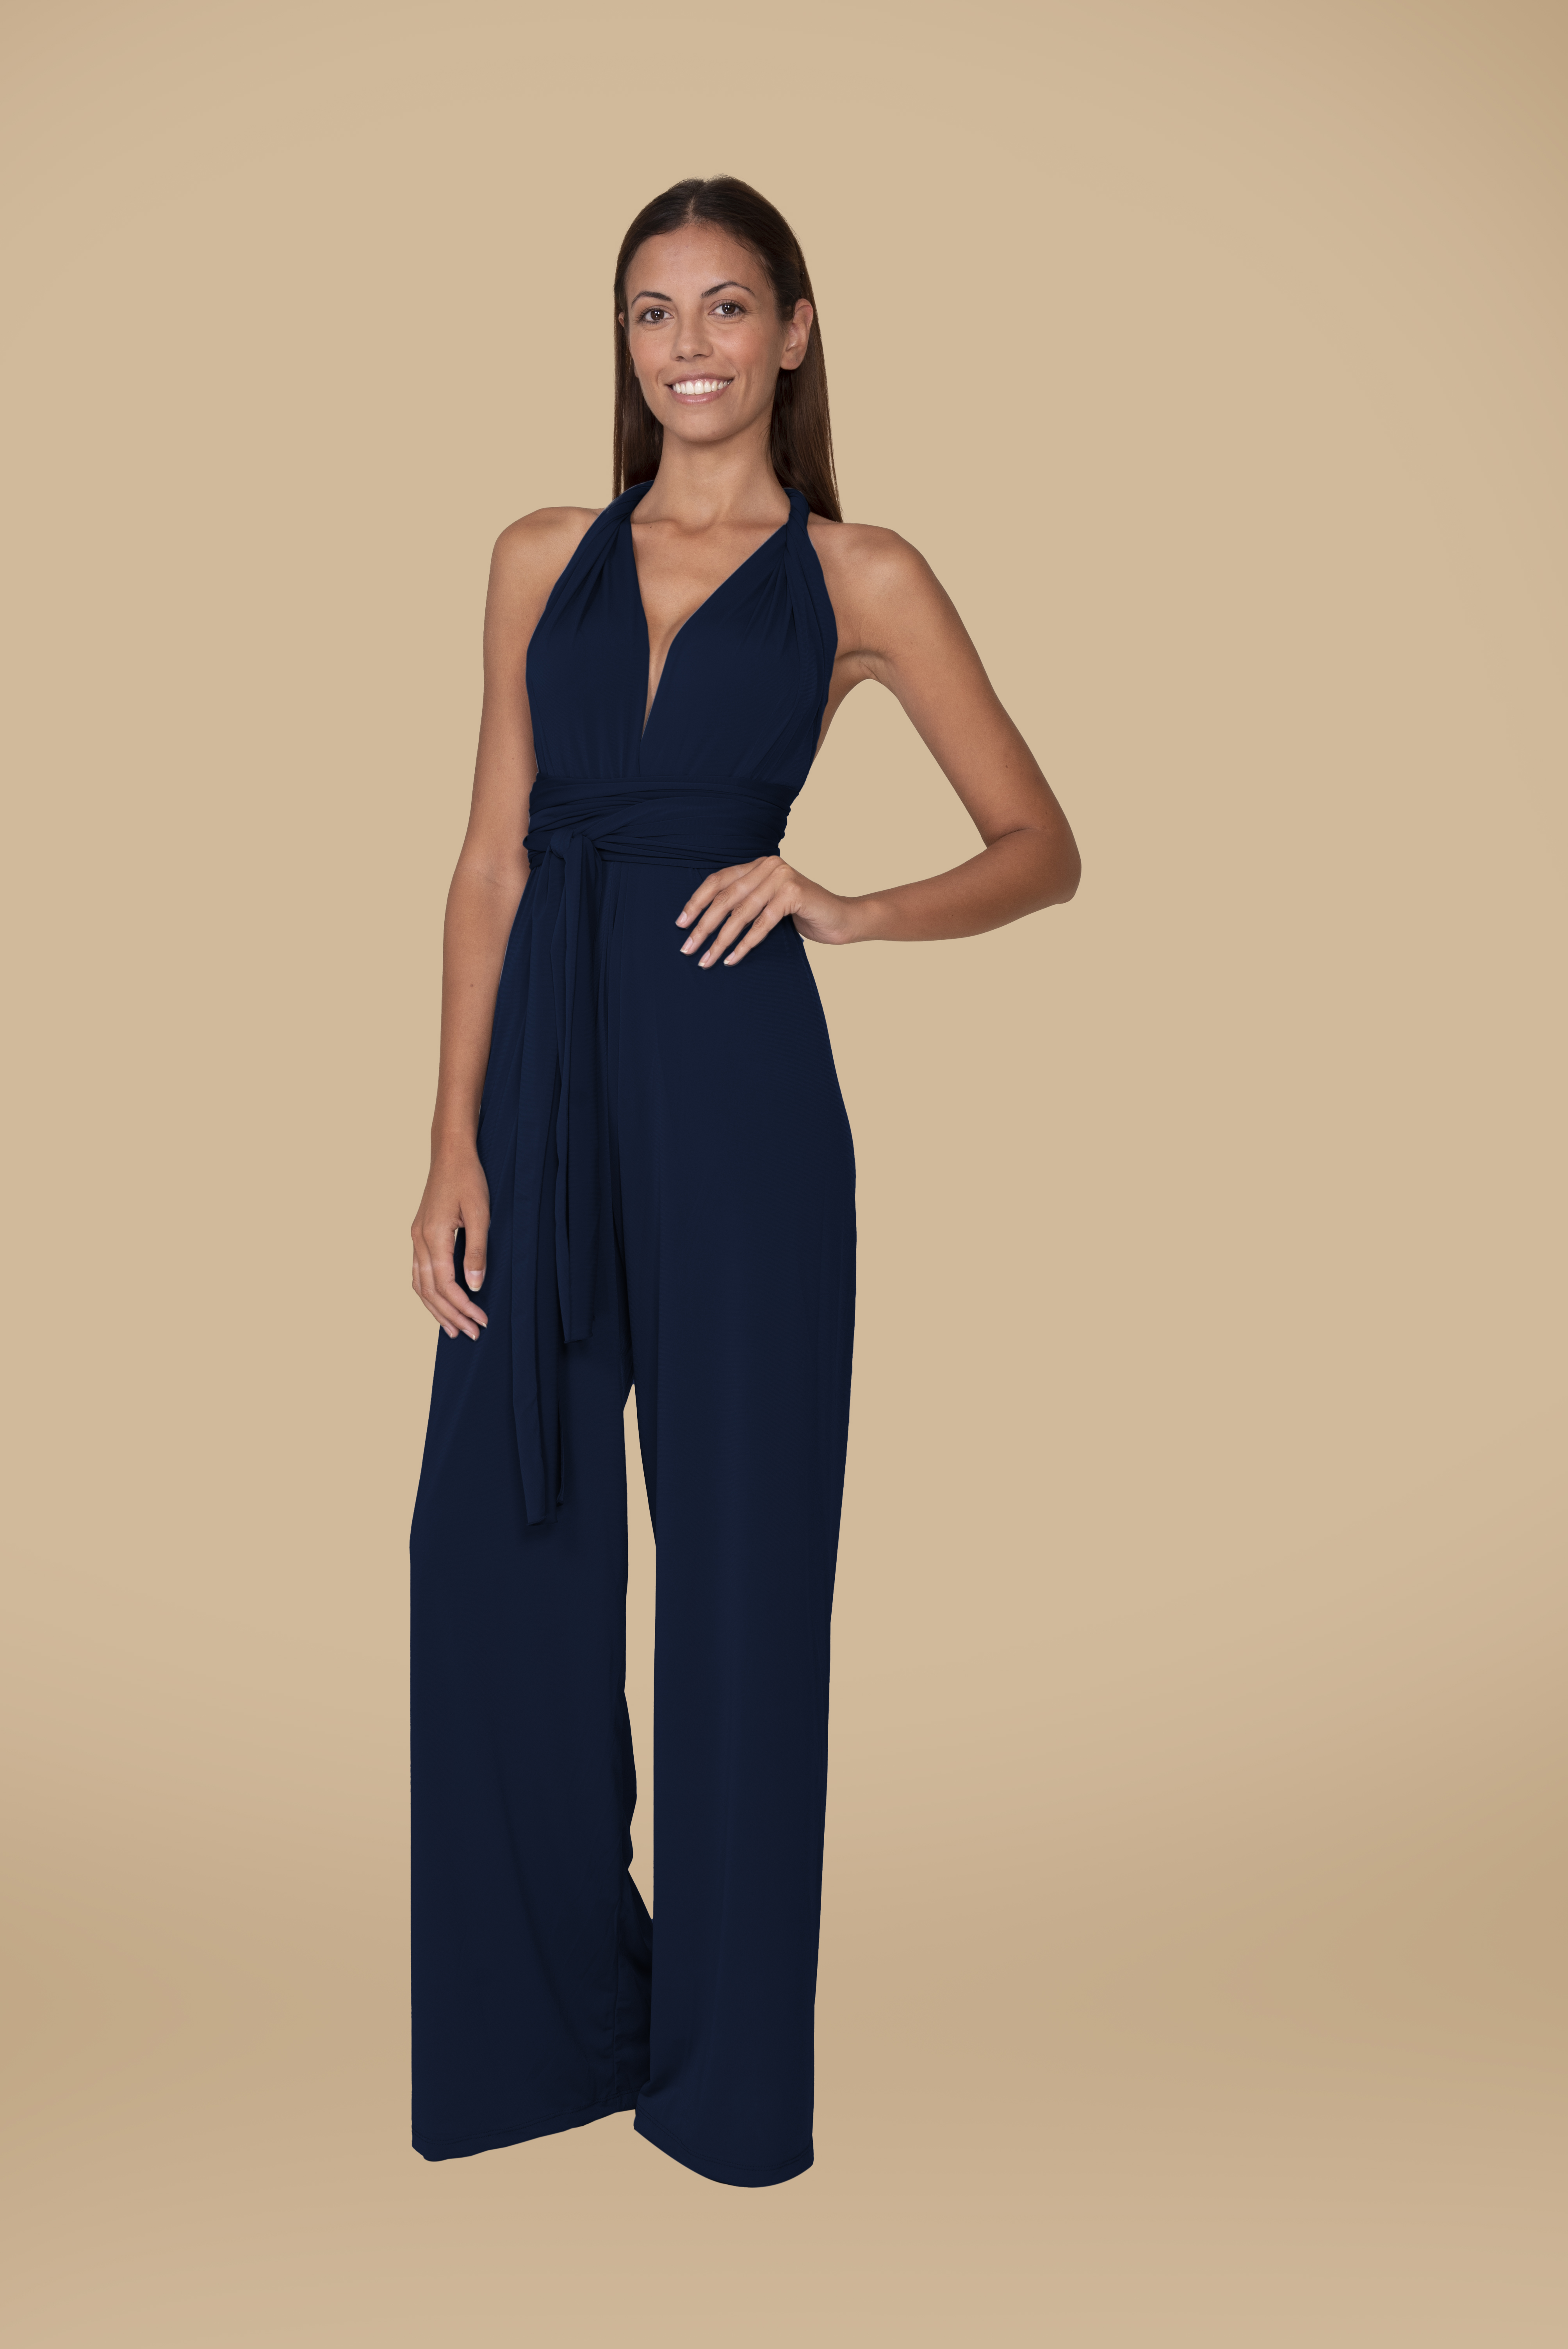 JUMPSUIT IN NAVY by Infinit Barcelona